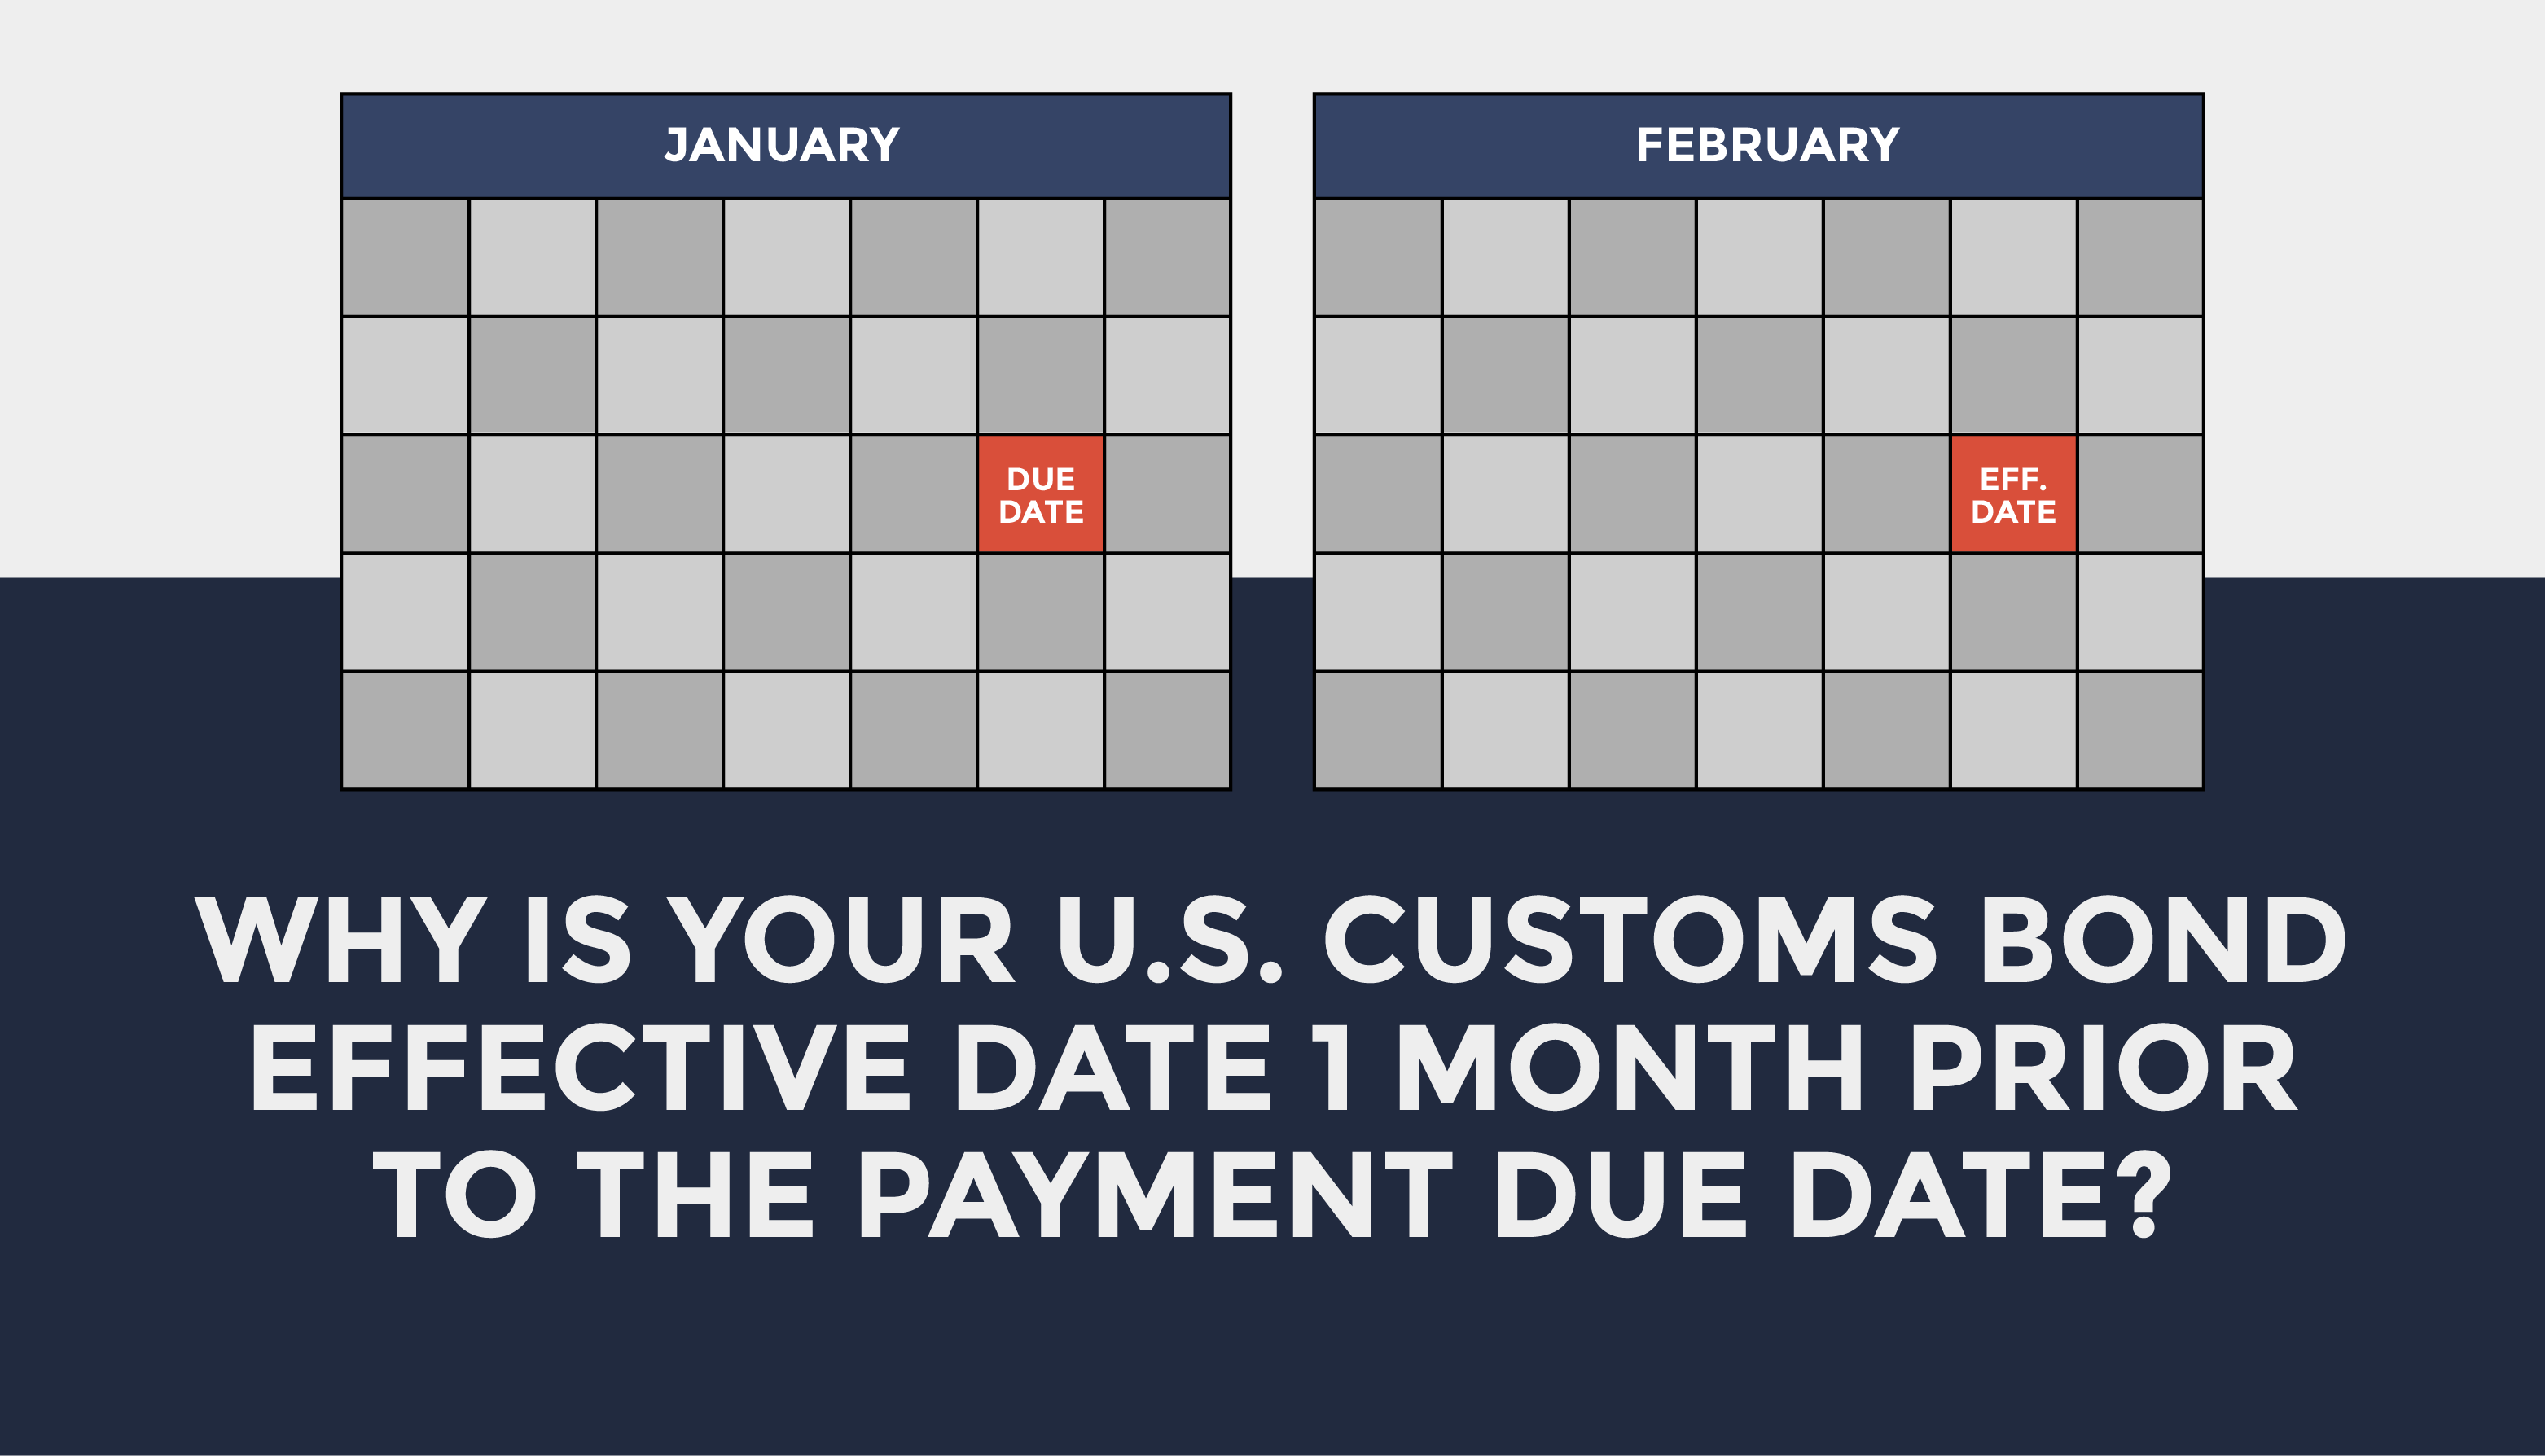 Trade Risk Guaranty defines the difference between the customs bond effective date and the payment due date.